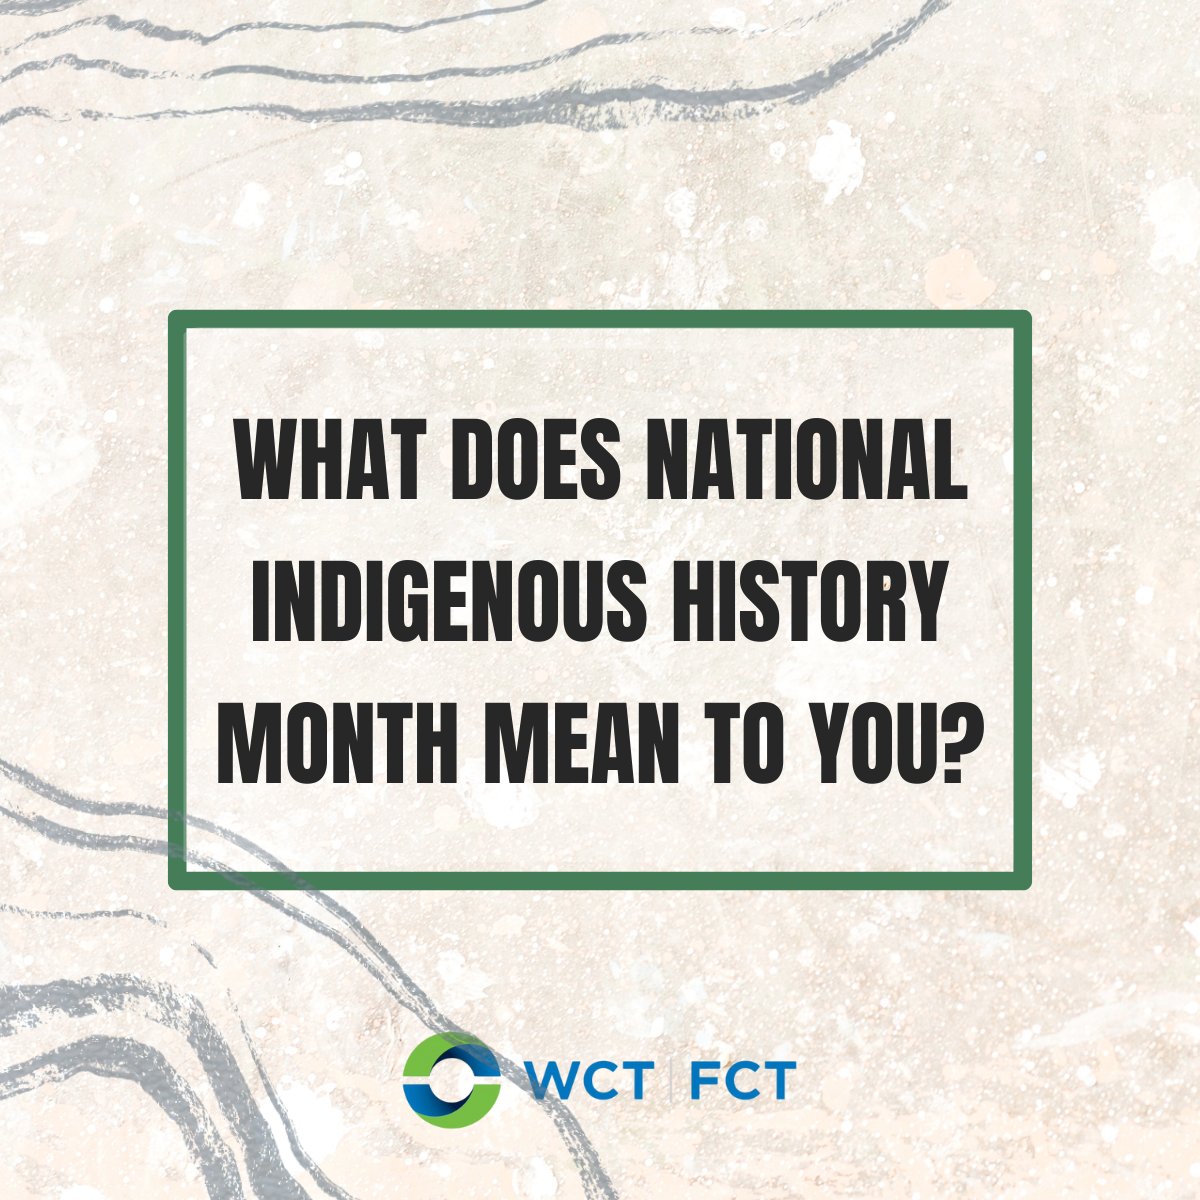 It's National Indigenous History Month! At WCT, we embrace diversity, inclusion, and anti-colonial practices. Join us in recognizing inclusivity, past injustices, and working towards an inclusive Canadian society.